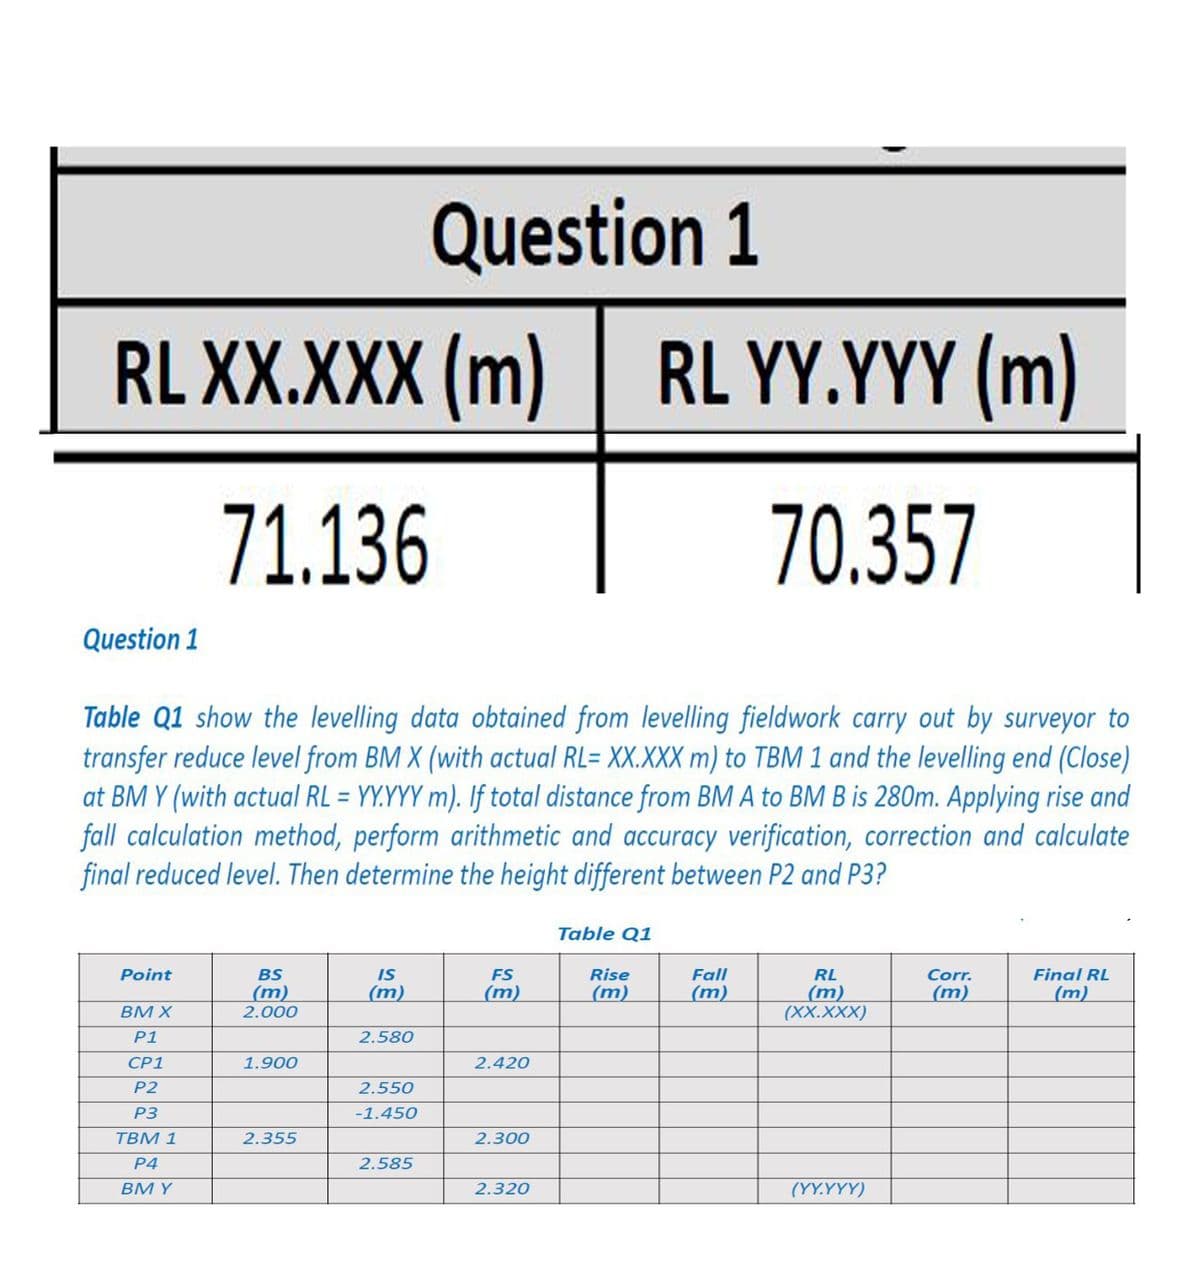 Question 1
RL XX.XXX (m)
RL YY.YYY (m)
71.136
70.357
Question 1
Table Q1 show the levelling data obtained from levelling fieldwork carry out by surveyor to
transfer reduce level from BM X (with actual RL= XX.XXX m) to TBM 1 and the levelling end (Close)
at BM Y (with actual RL = YY.YYY m). If total distance from BM A to BM B is 280m. Applying rise and
fall calculation method, perform arithmetic and accuracy verification, correction and calculate
final reduced level. Then determine the height different between P2 and P3?
%3D
Table Q1
IS
(m)
Point
BS
FS
Rise
Fall
RL
Corr.
Final RL
(m)
(m)
(m)
(m)
(m)
(XX.XXX)
(m)
(m)
ВМ X
2.000
P1
2.580
СР1
1.900
2.420
P2
2.550
P3
-1.450
ТВМ 1
2.355
2.300
P4
2.585
BM Y
2.320
(YY.YYY)
